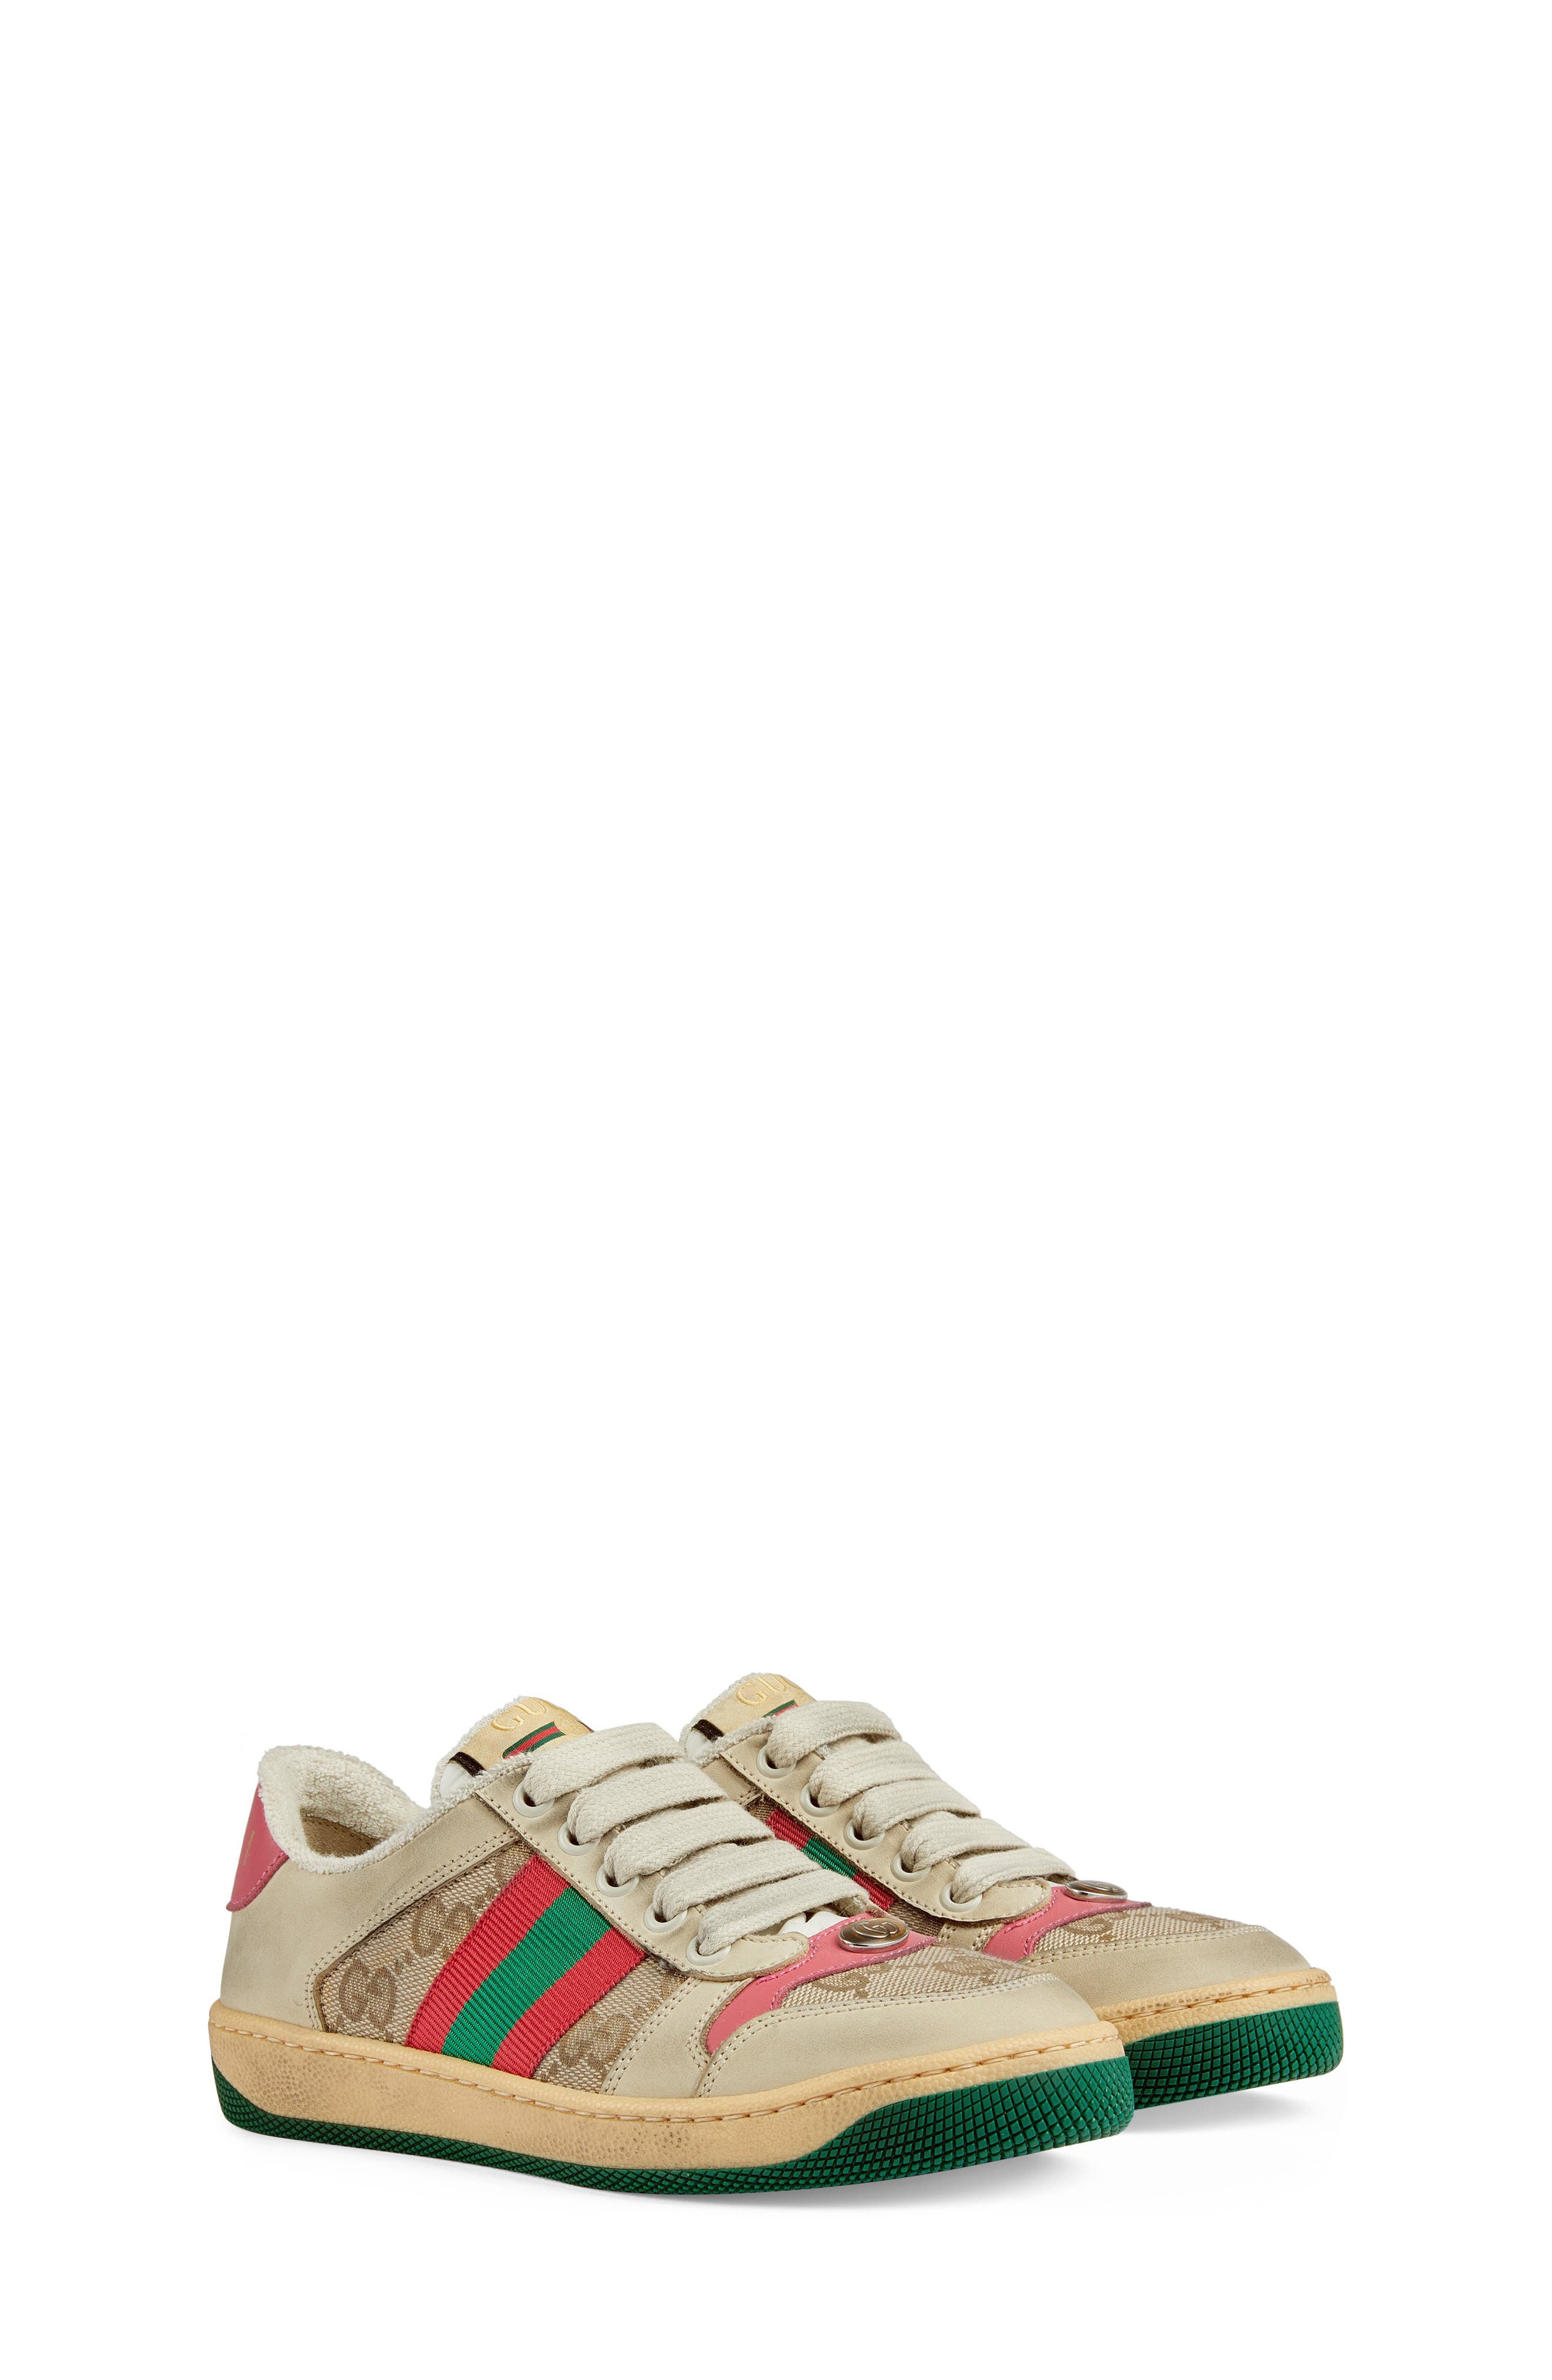 gucci shoes for boys